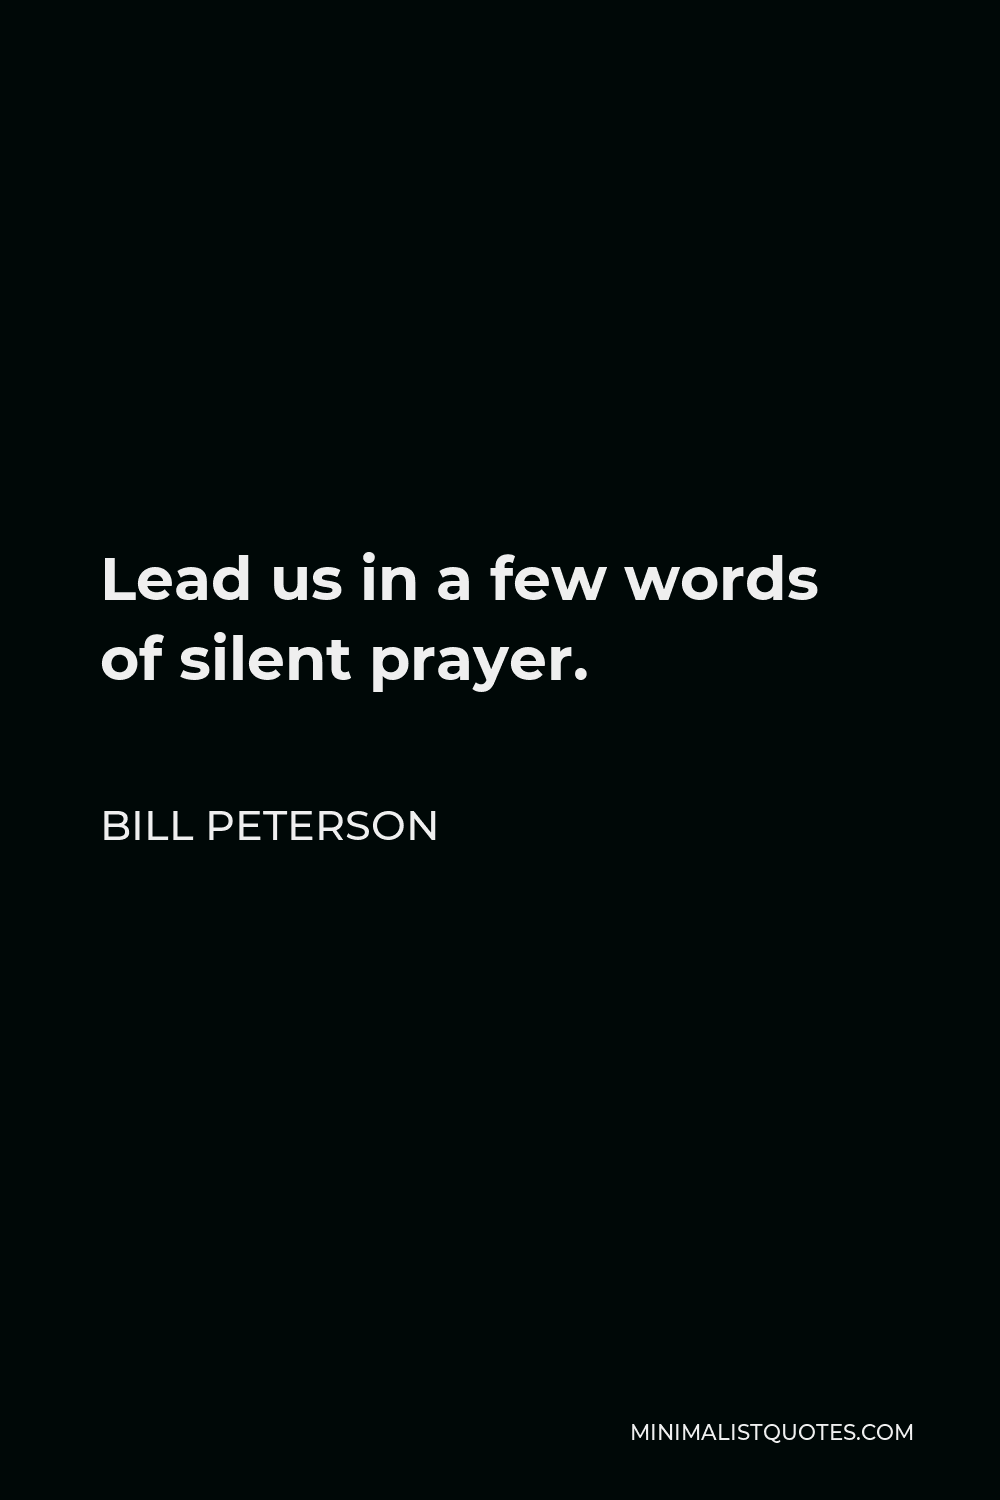 Bill Peterson Quote - Lead us in a few words of silent prayer.